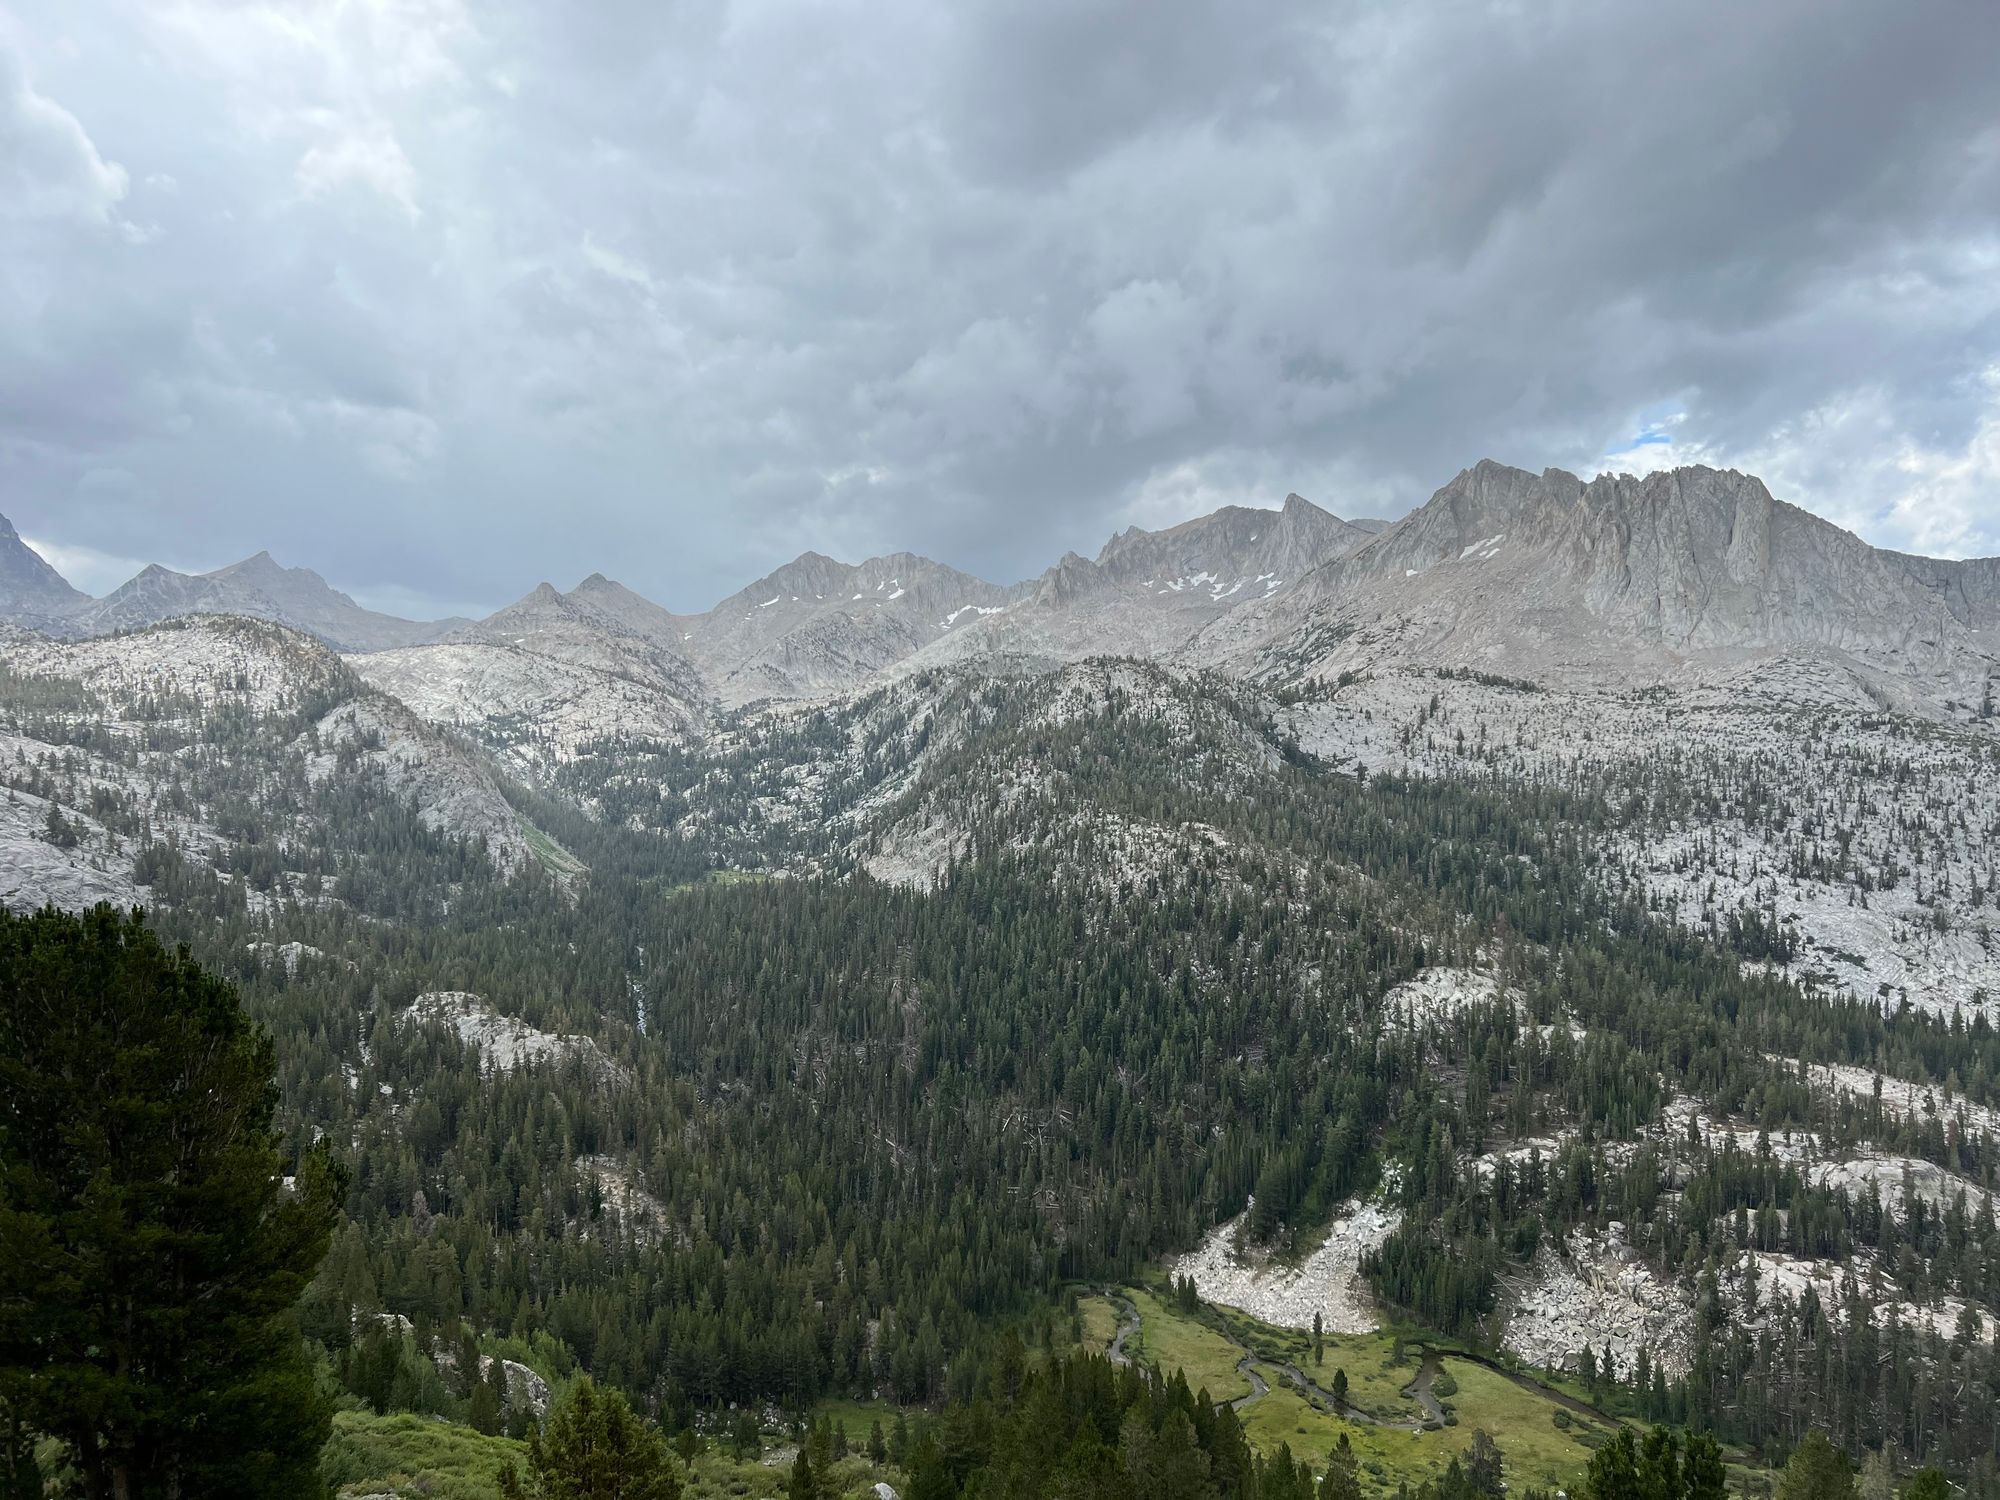 Dark clouds over bare mountain peaks. A meadow with a stream in the foreground.